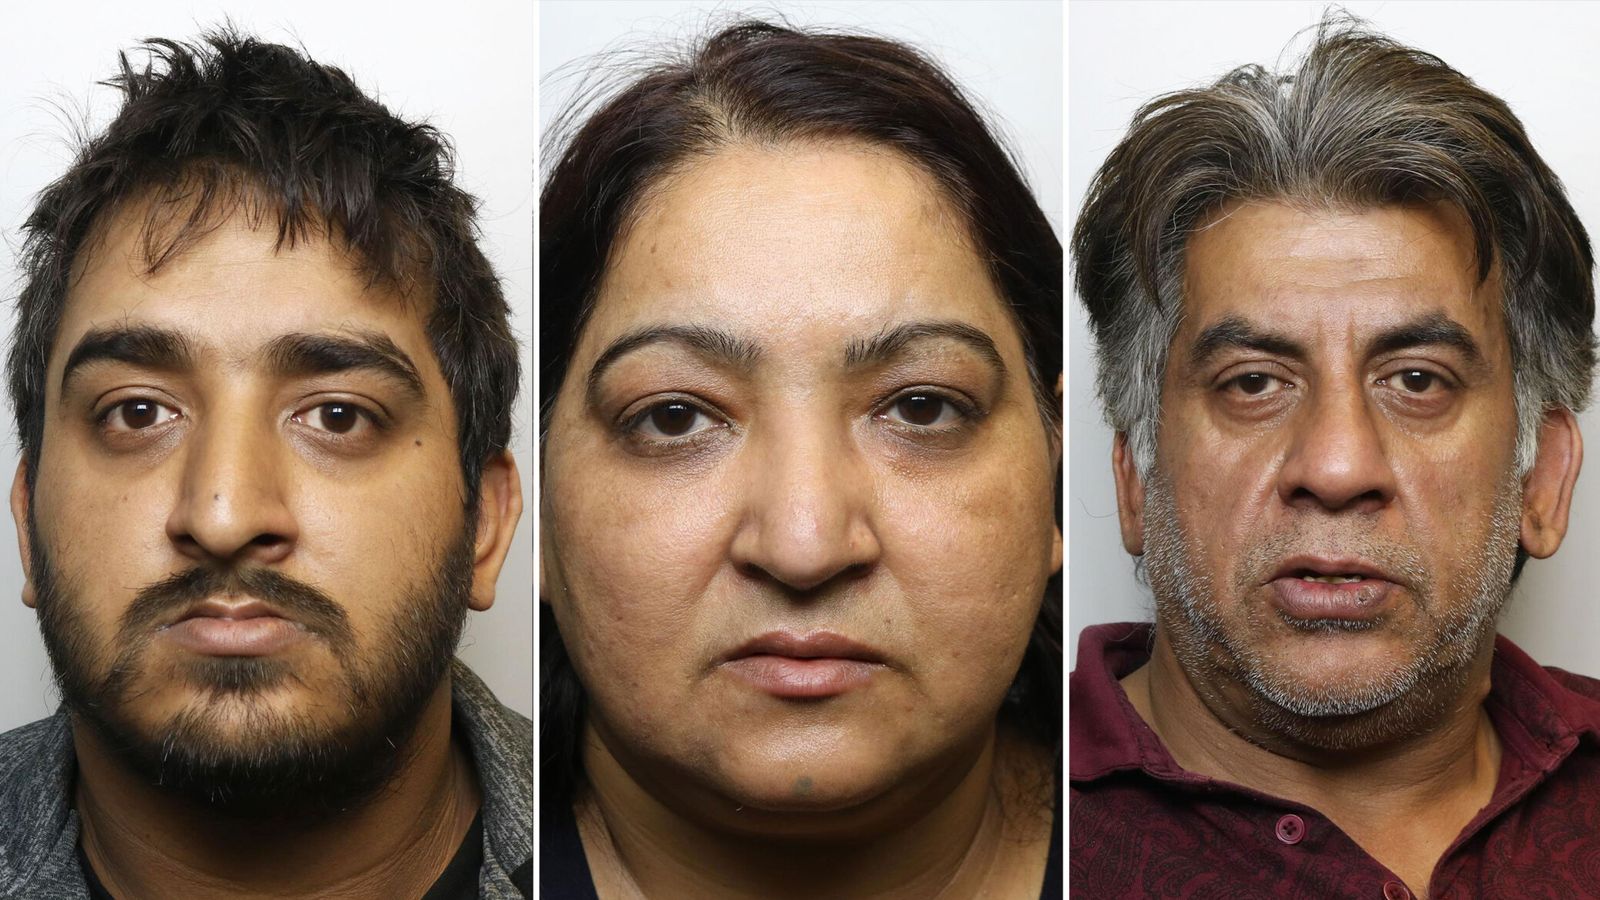 Husband and his parents jailed for leaving wife in vegetative state after arranged marriage